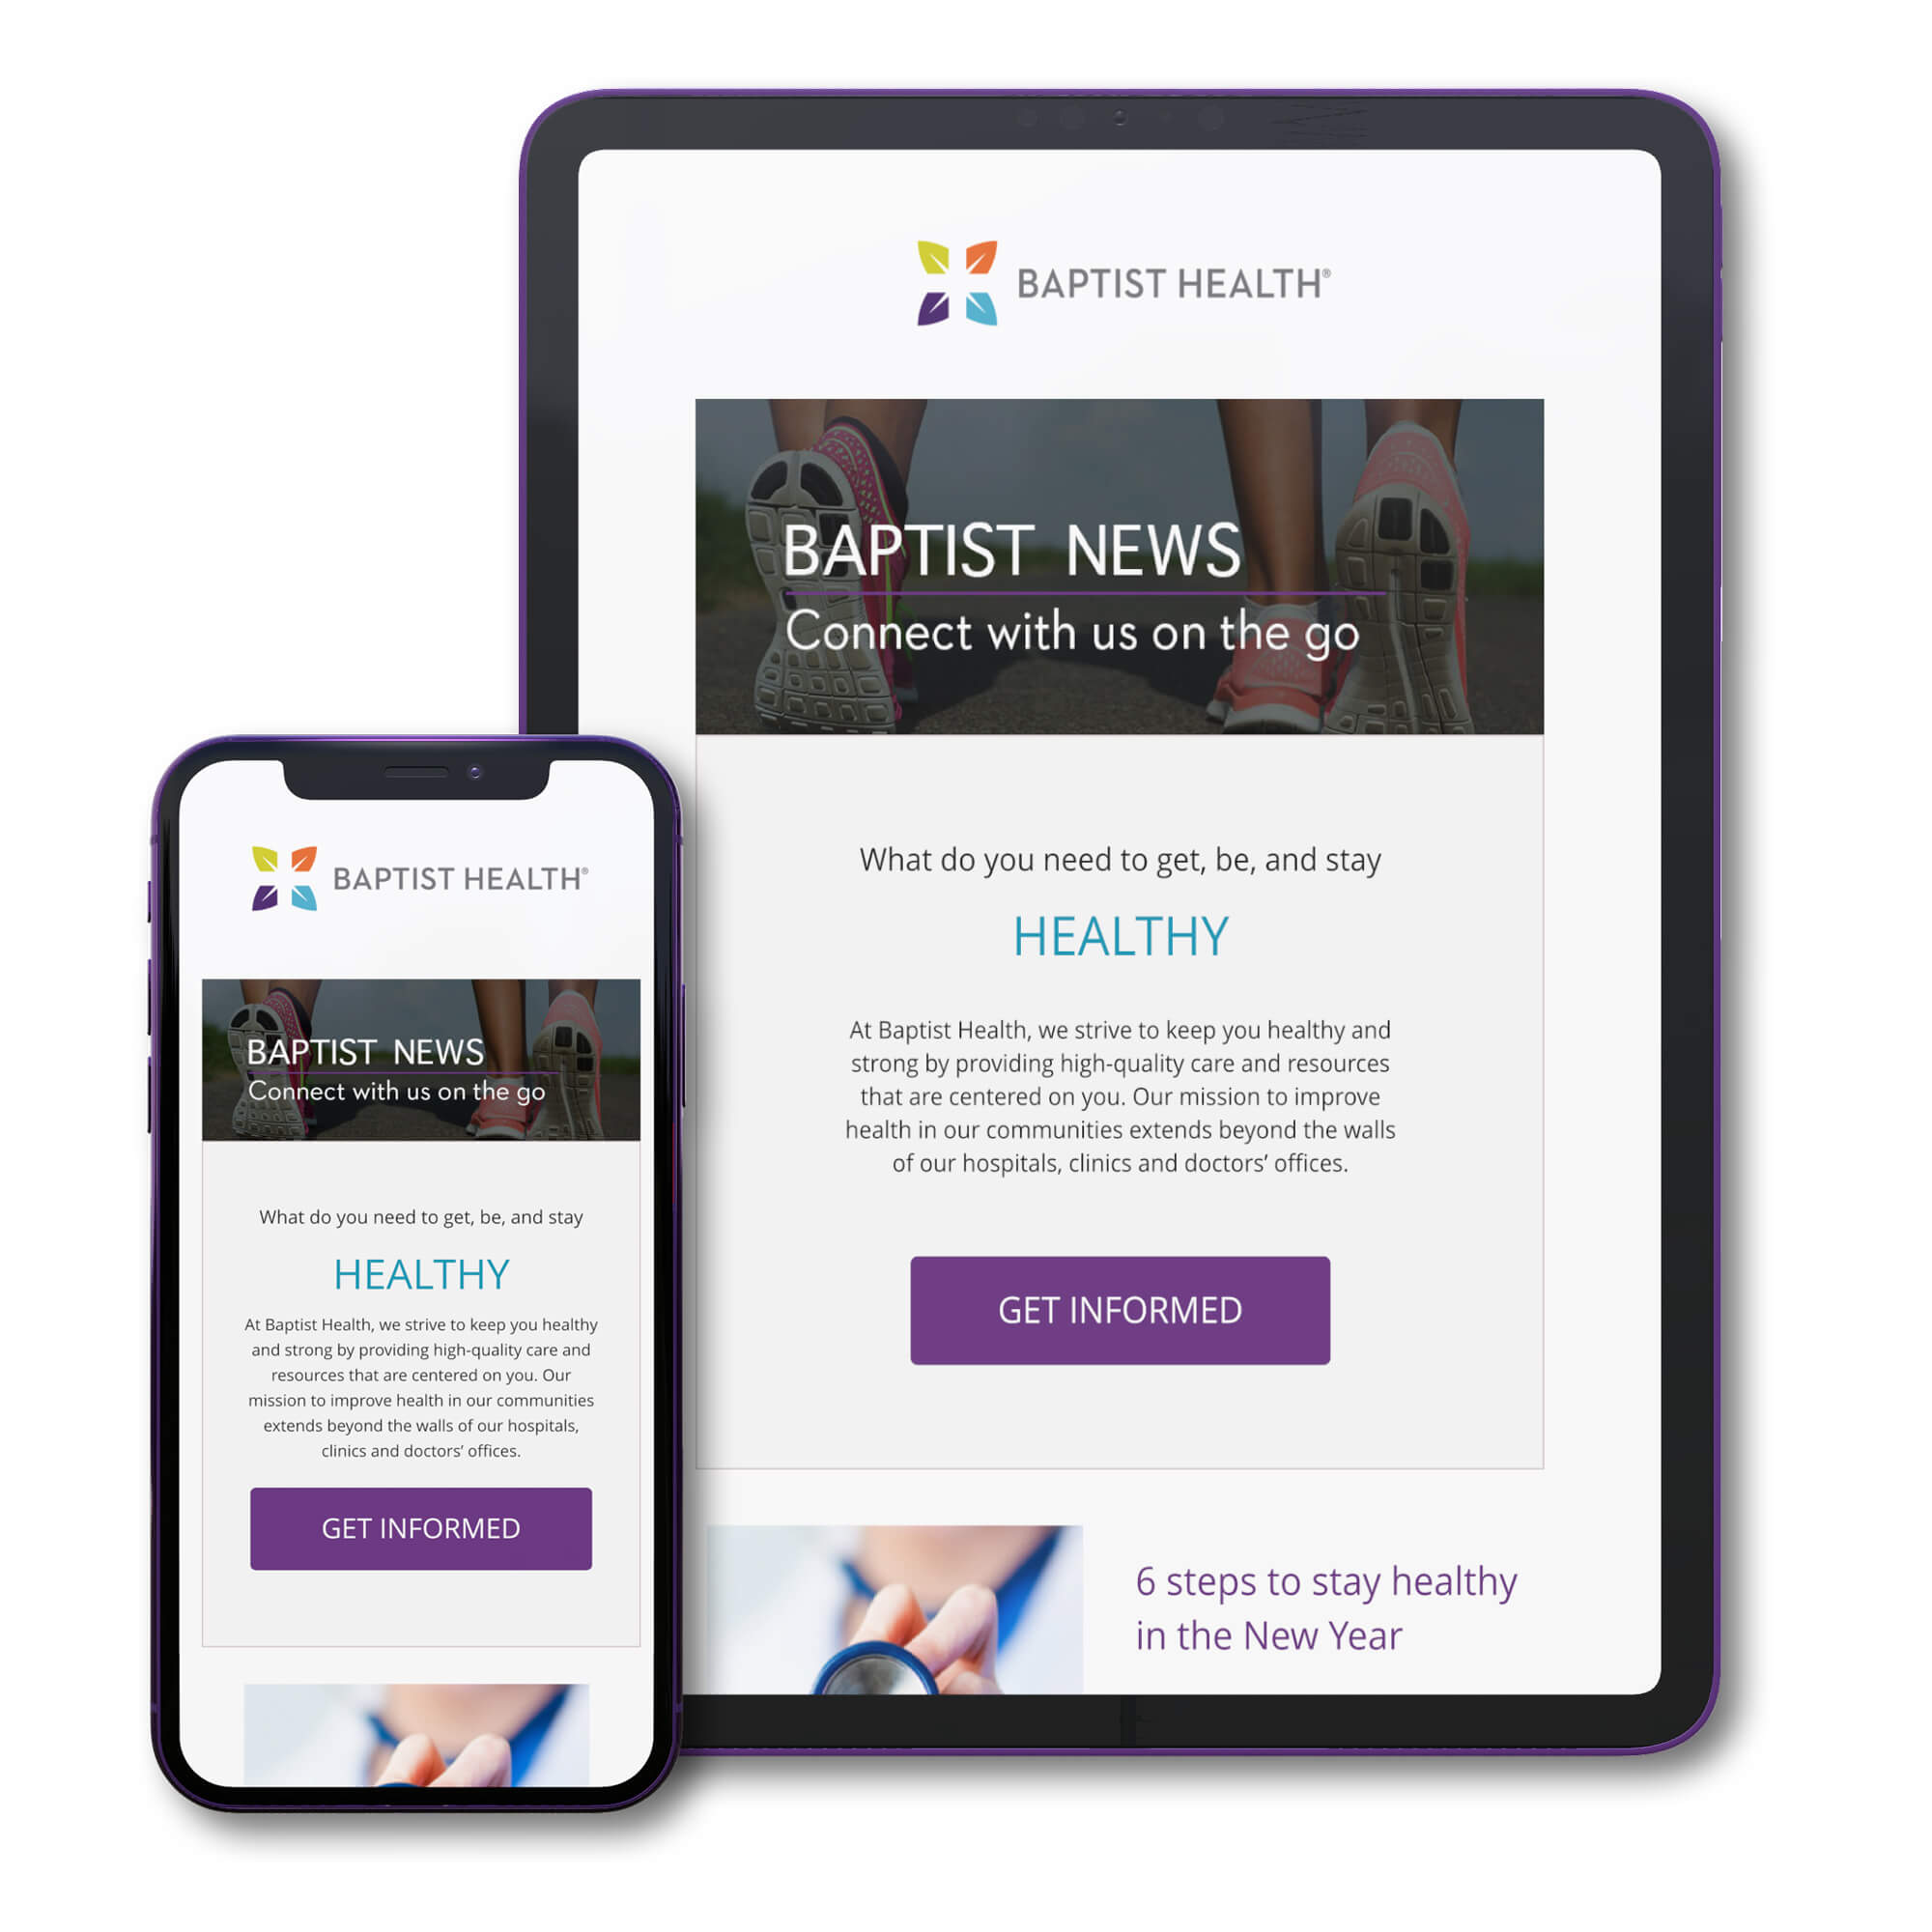 Baptist Health Email Template on Devices